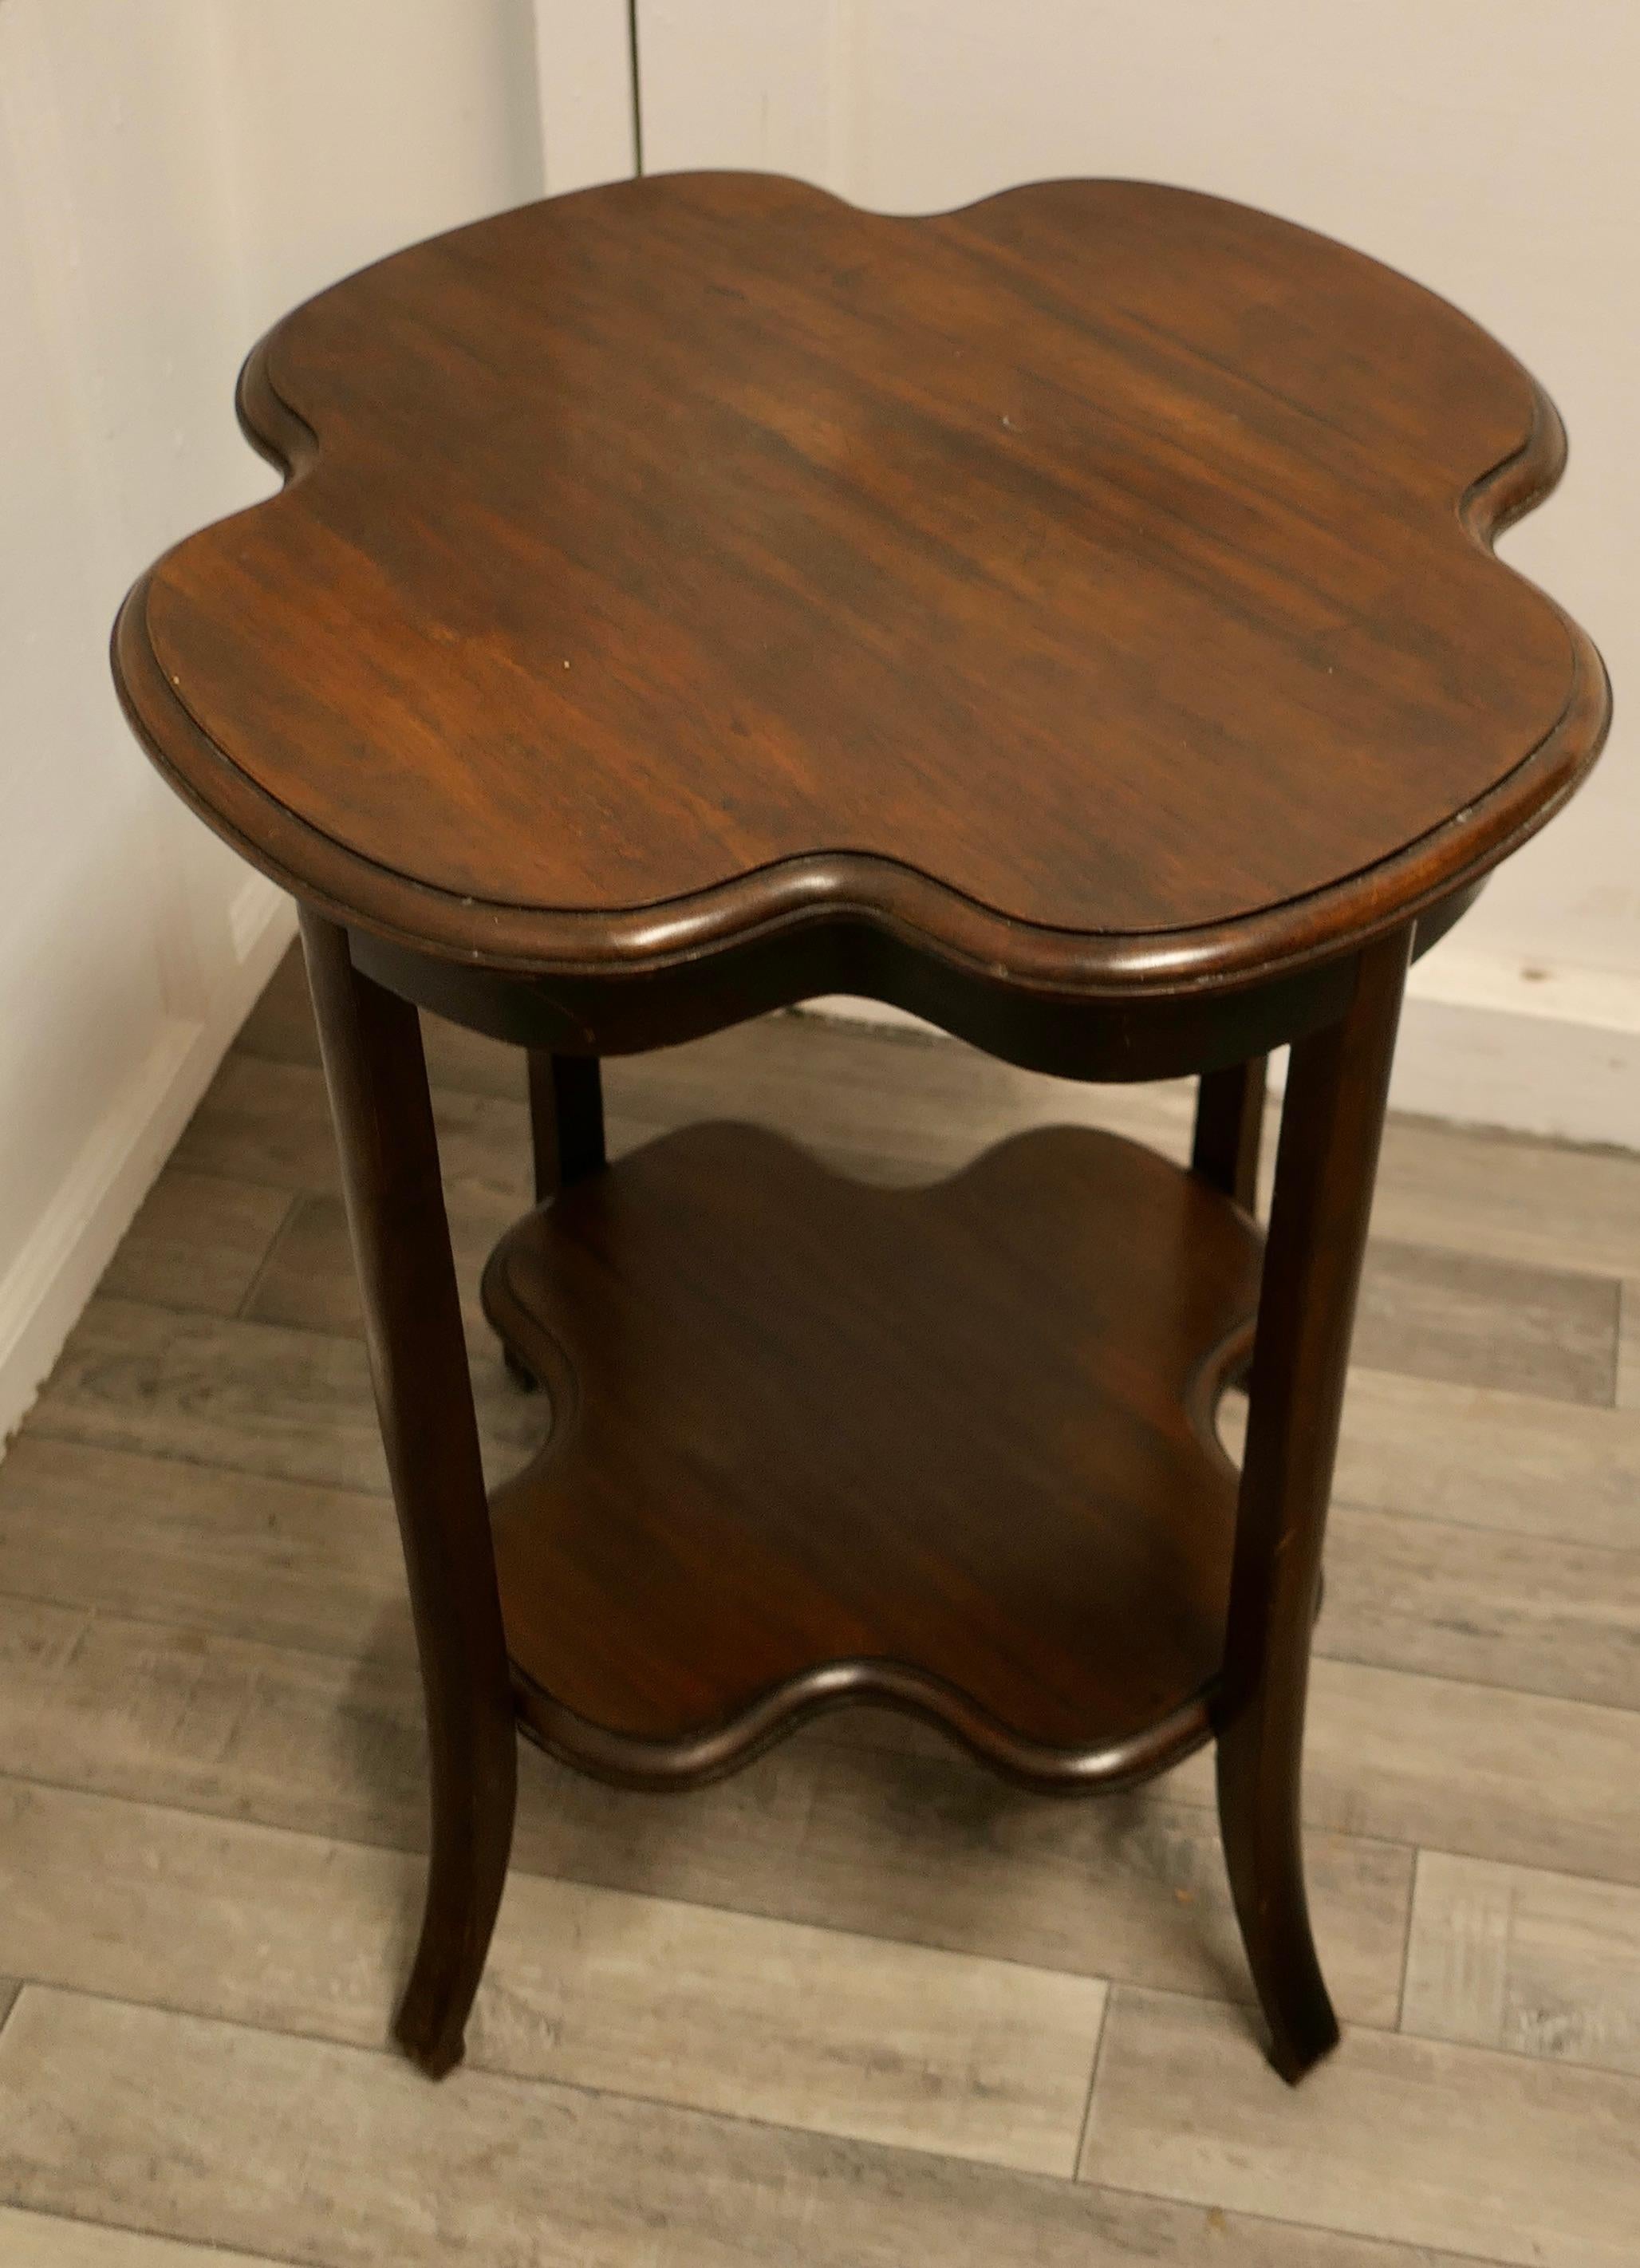 20th Century Irish Walnut Side or Lamp Table the Table Has a Four Leaf Clover Shape For Sale